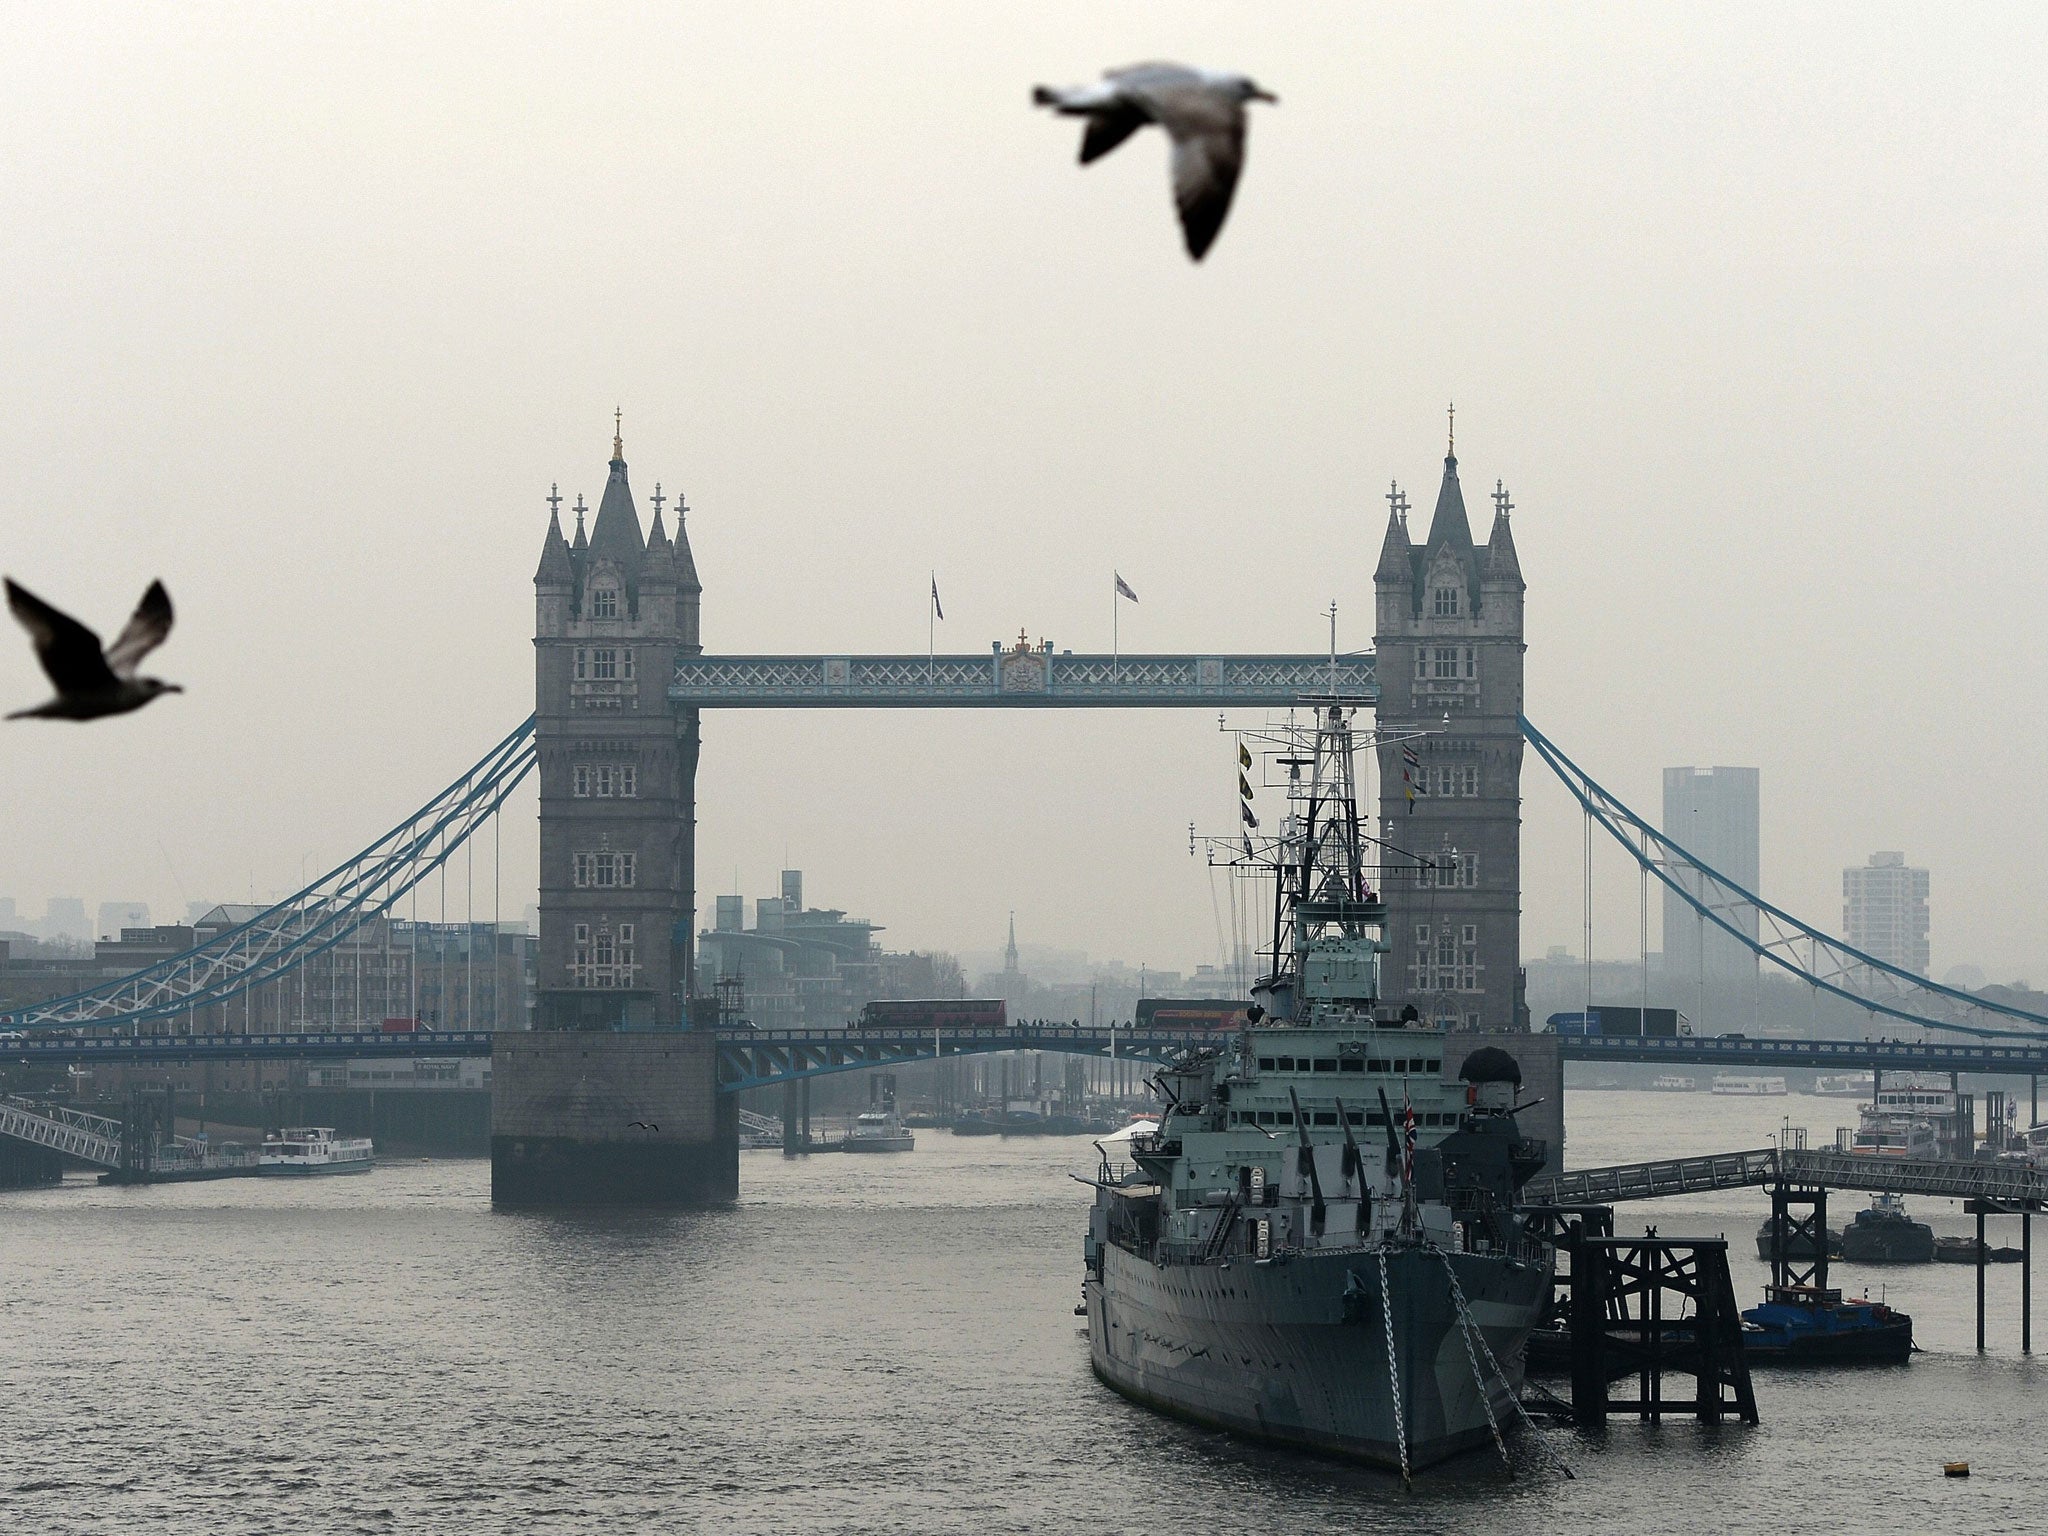 Tower Bridge was shut after the bomb was discovered